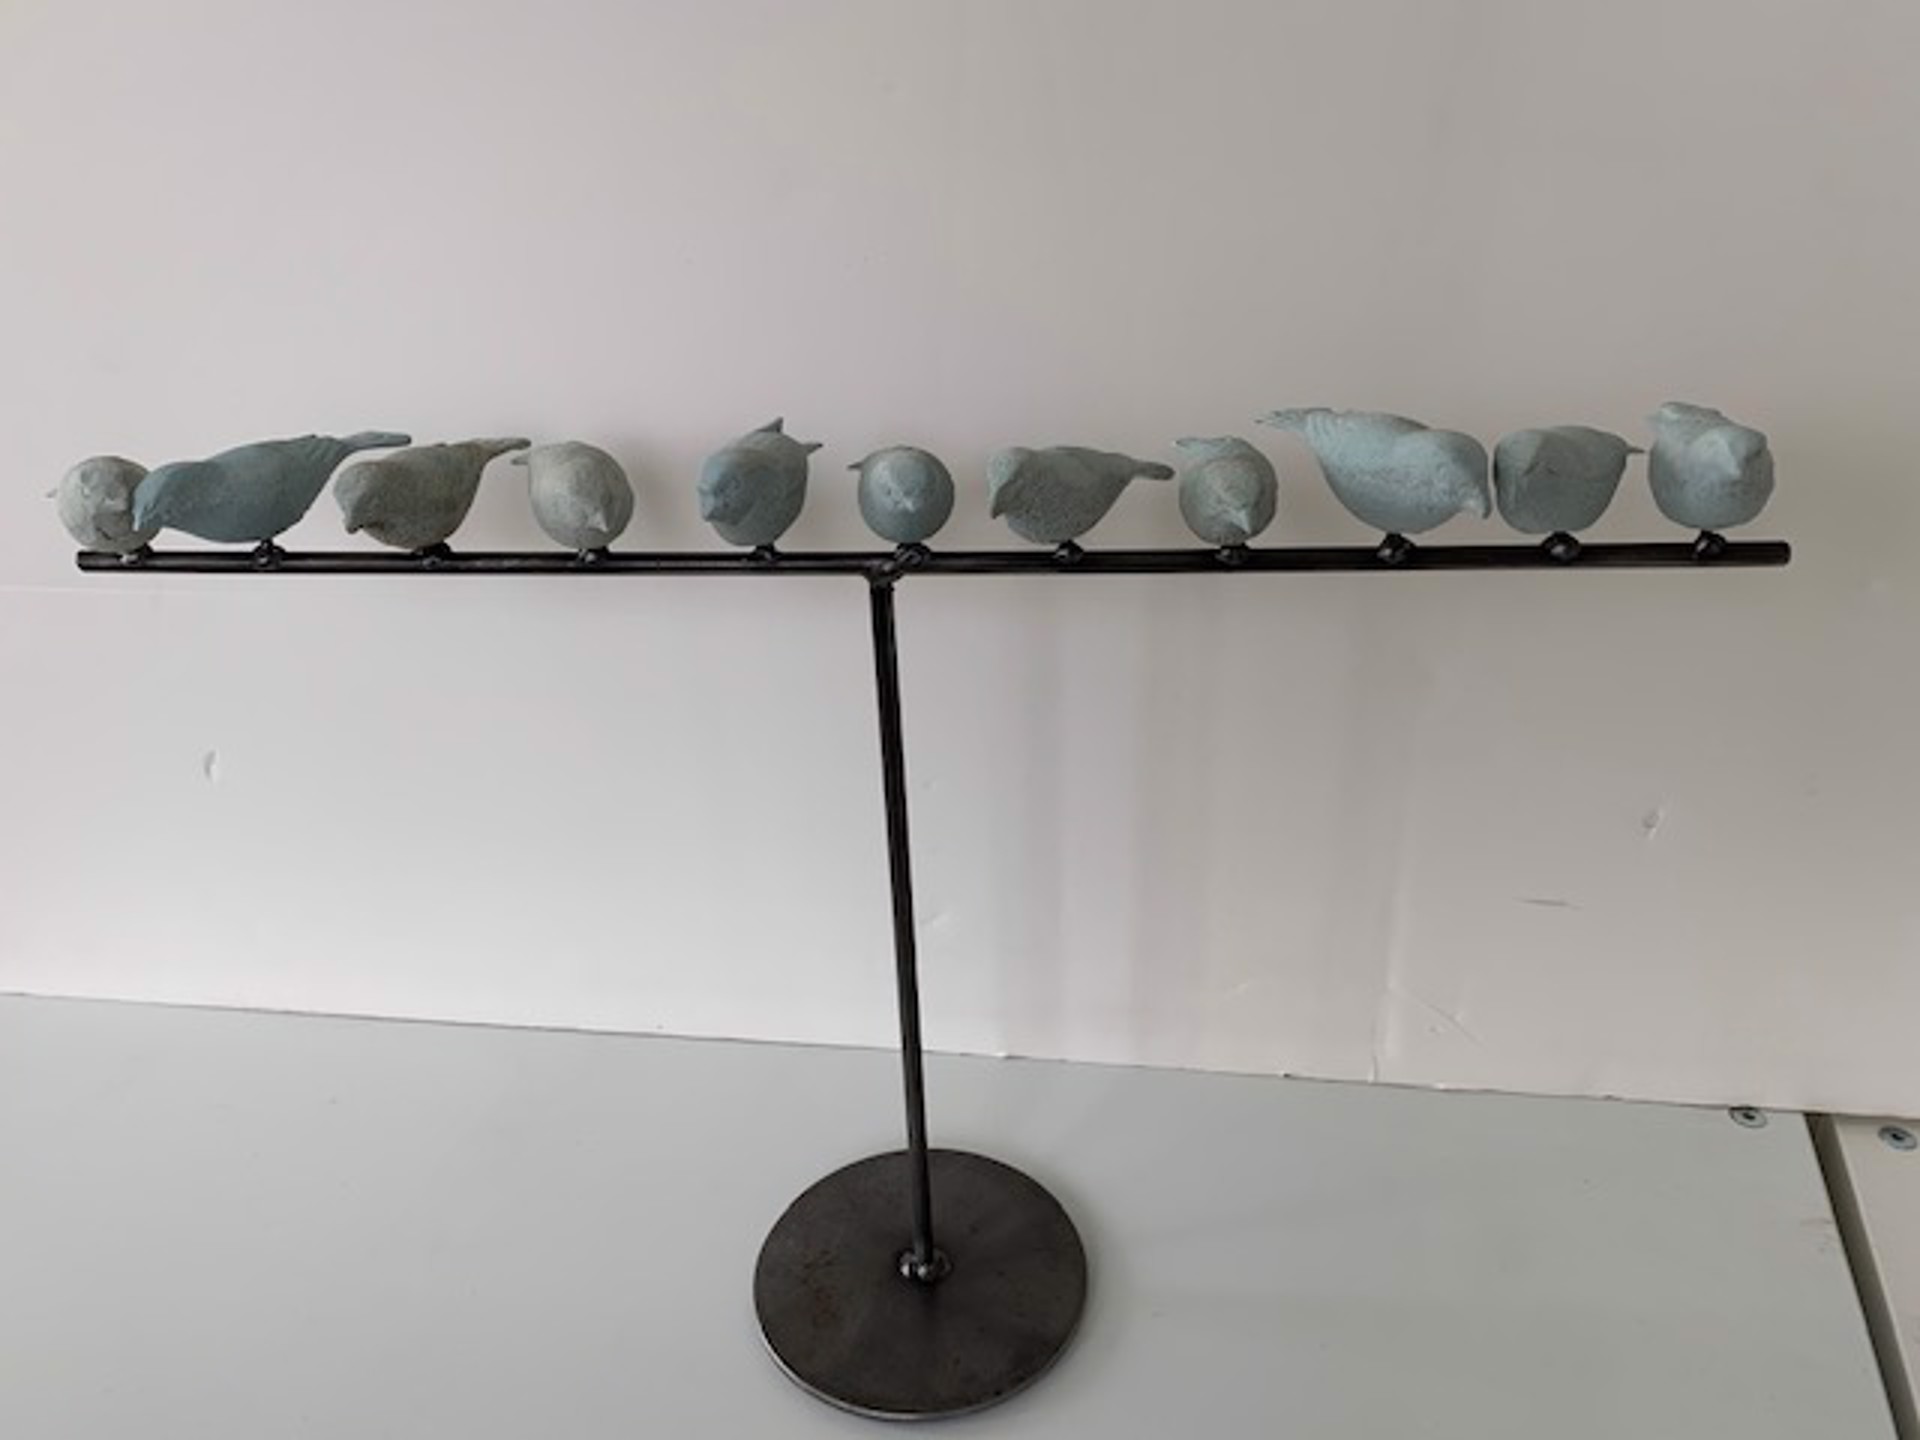 11 Birds on a Stand by Rory Burke